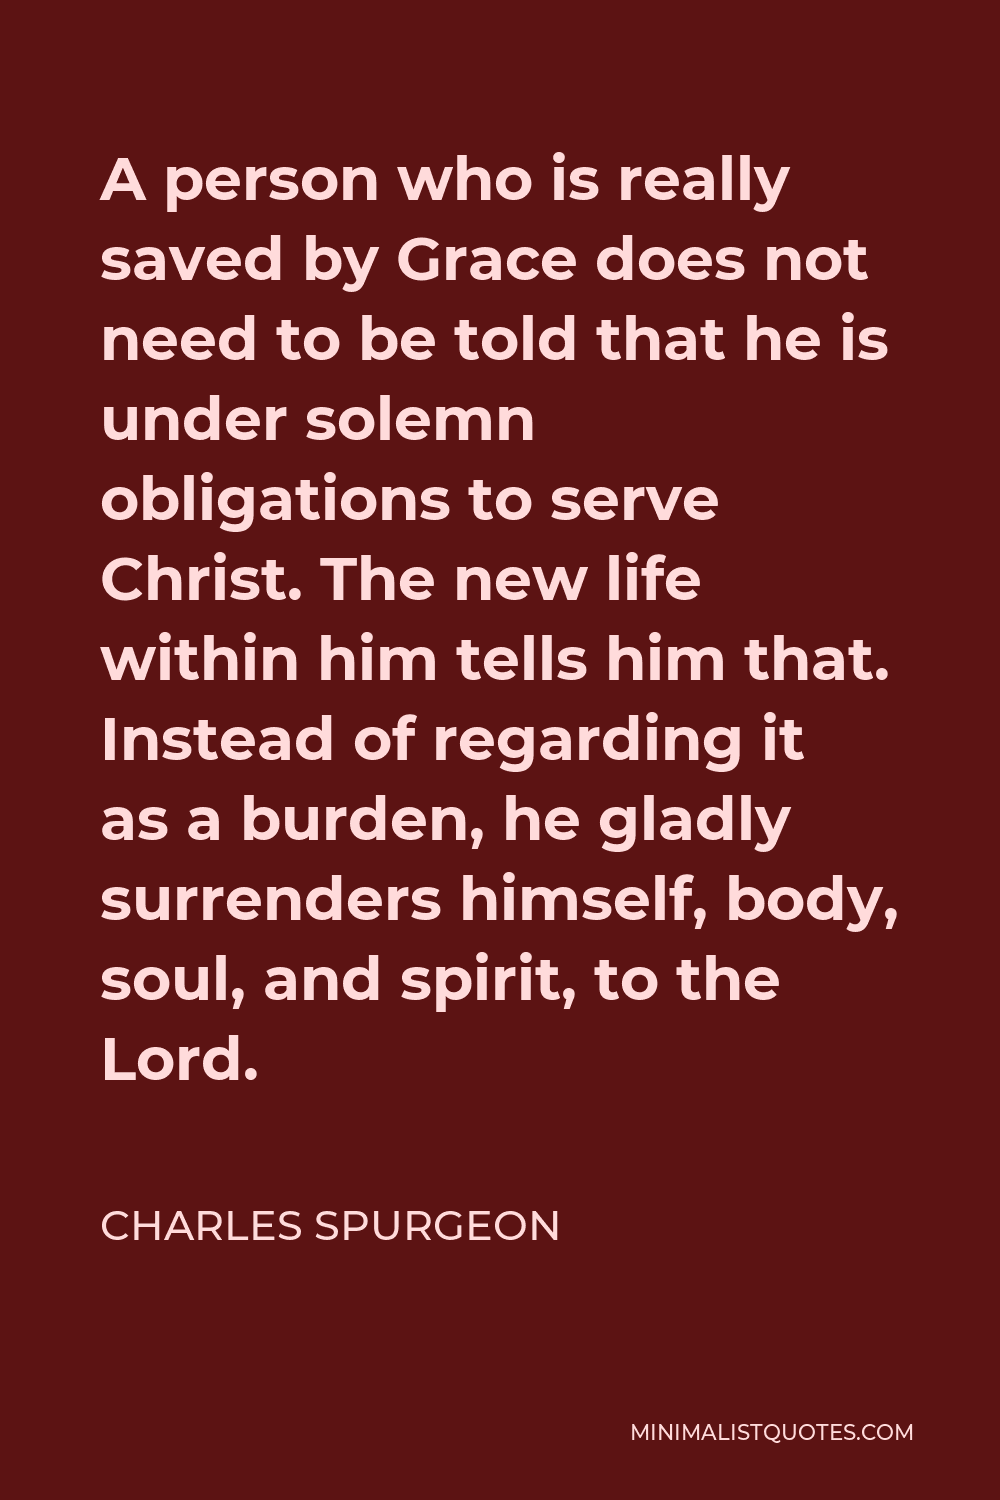 Charles Spurgeon Quote - A person who is really saved by Grace does not need to be told that he is under solemn obligations to serve Christ. The new life within him tells him that. Instead of regarding it as a burden, he gladly surrenders himself, body, soul, and spirit, to the Lord.